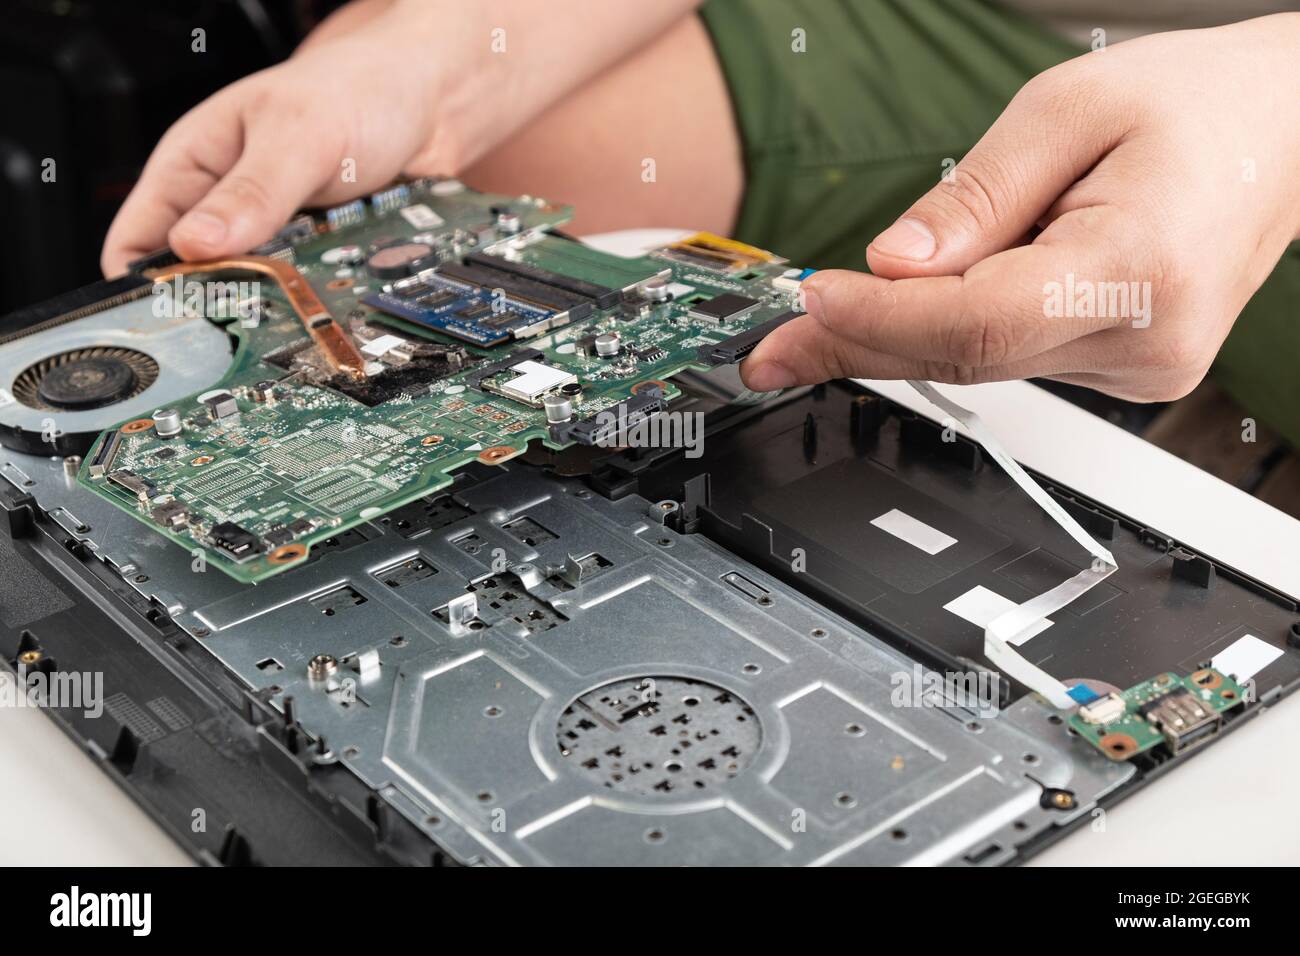 service repair inspection replacement motherboard Stock Alamy